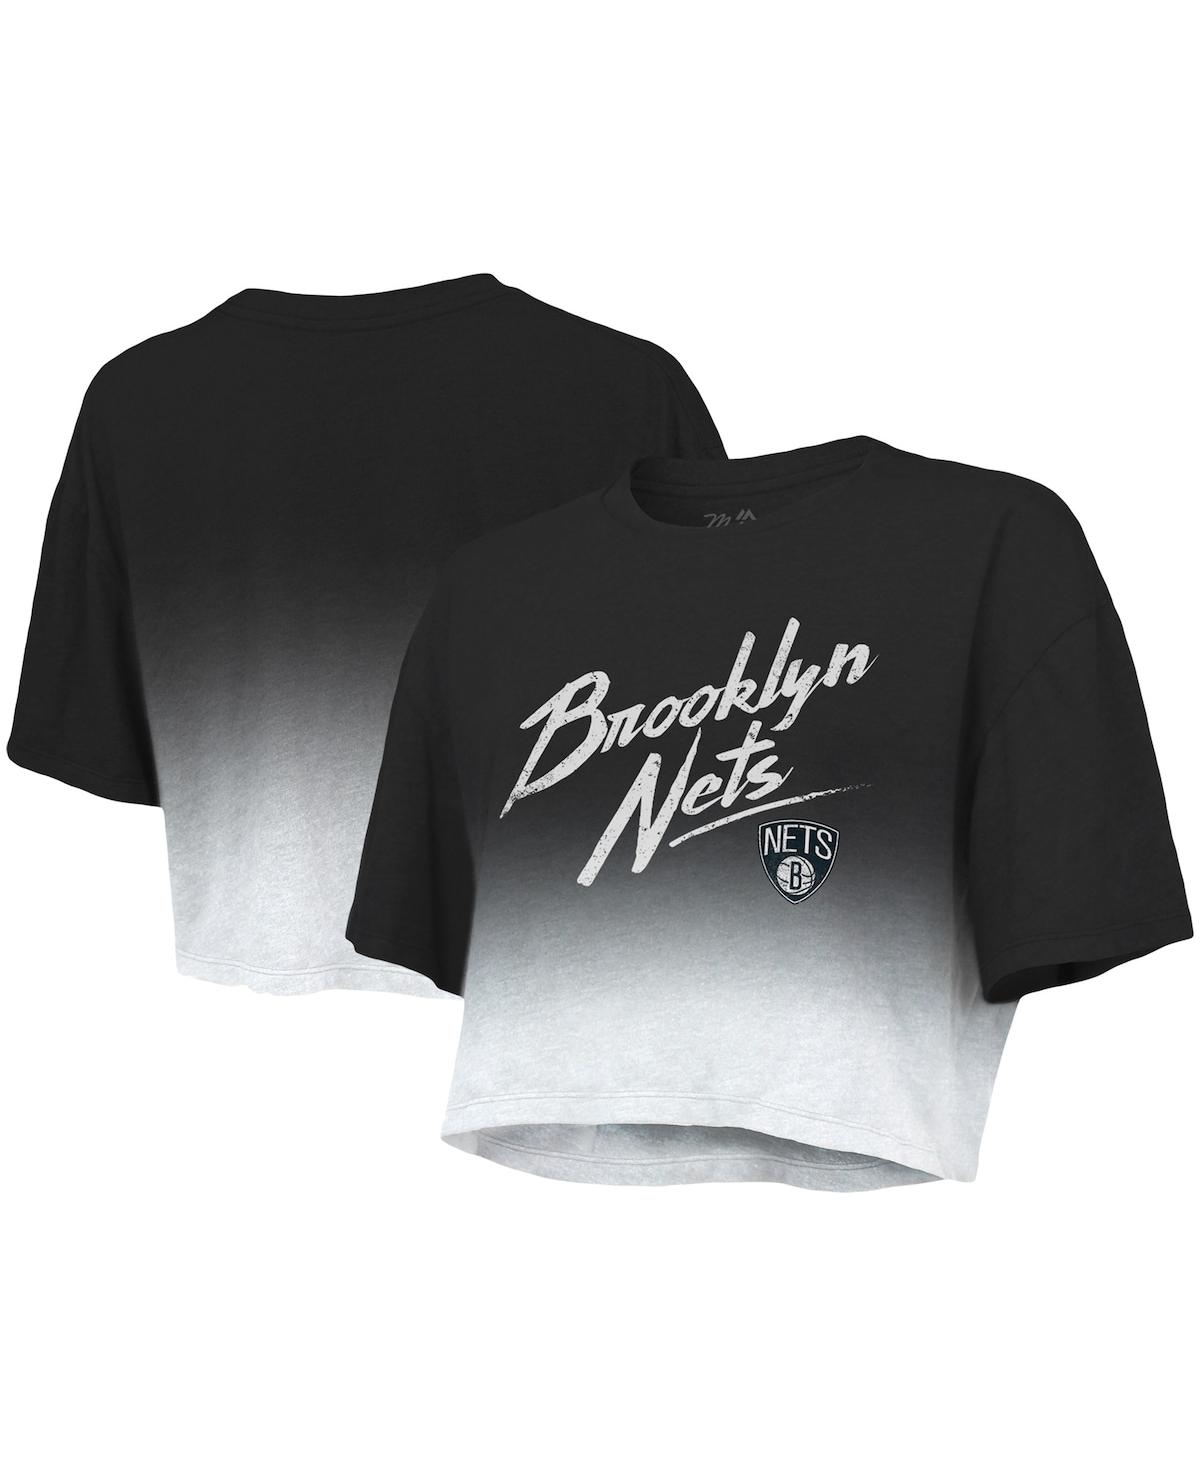 Women's Majestic Threads Black and White Brooklyn Nets Dirty Dribble Tri-Blend Cropped T-shirt - Black, White